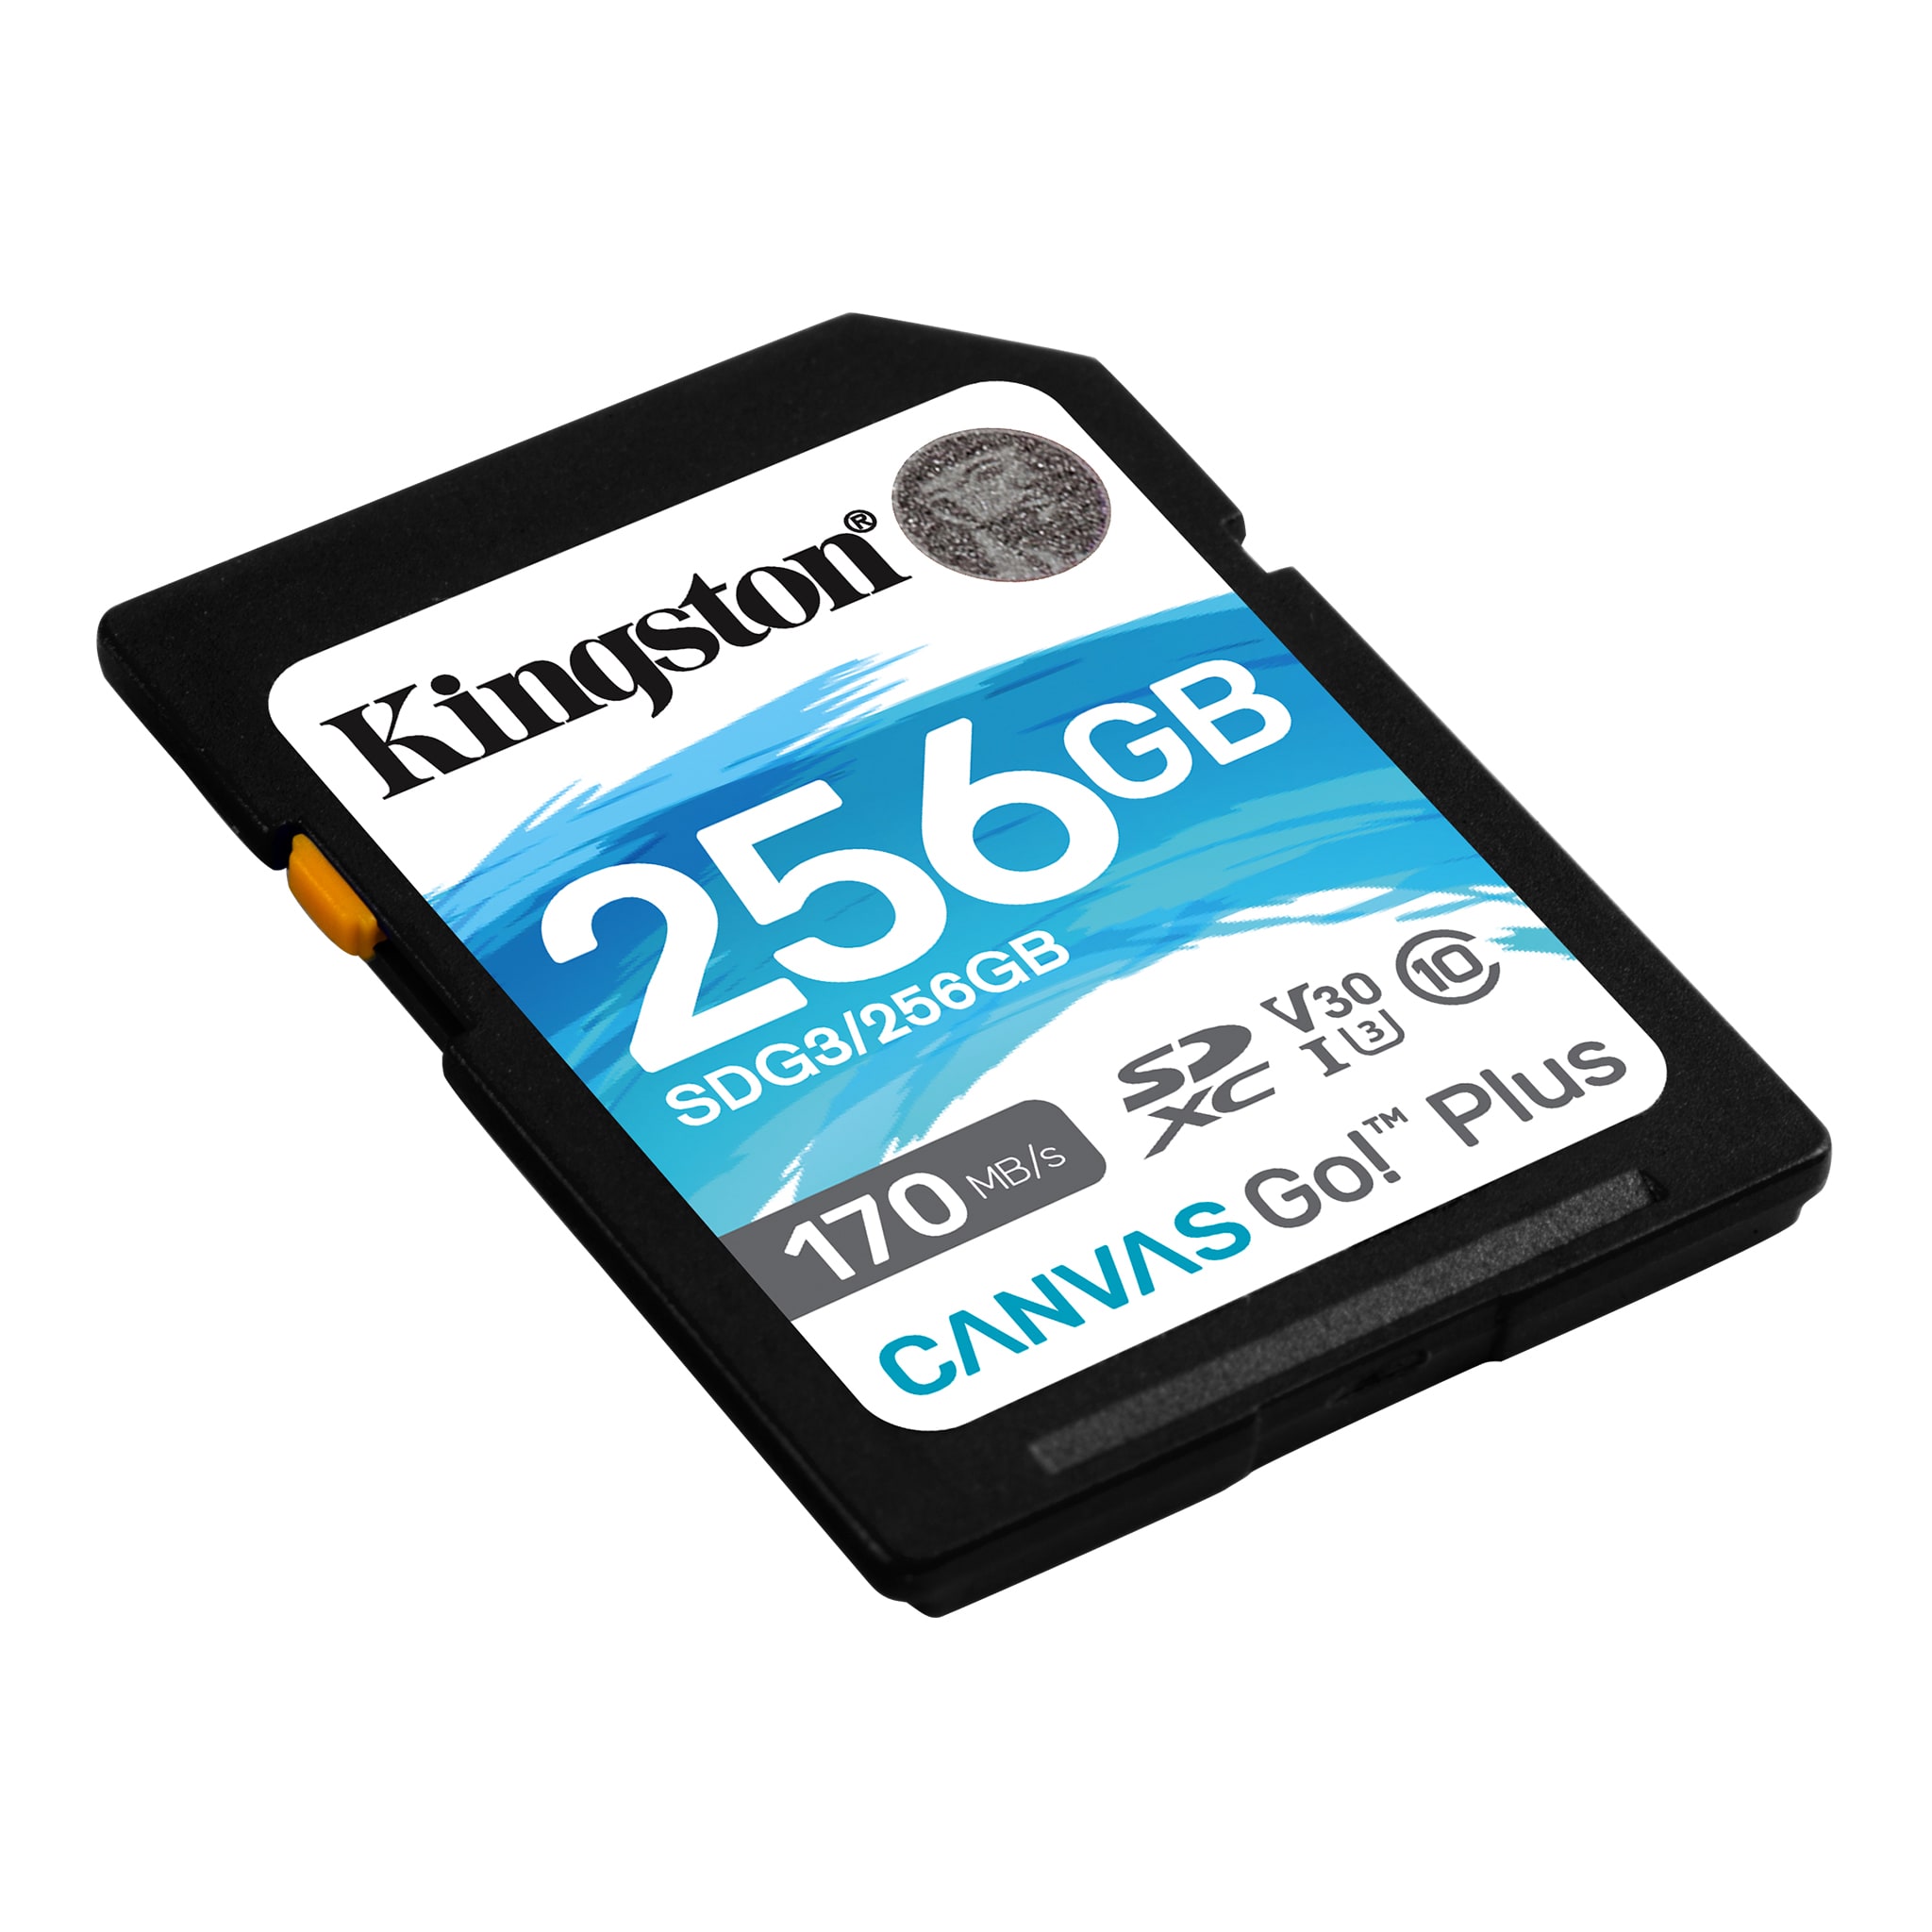 Professional Kingston 512GB for Asus ZenFone 3 Deluxe 80MBs Works with Kingston MicroSDXC Card Custom Verified by SanFlash. ZS550KL 